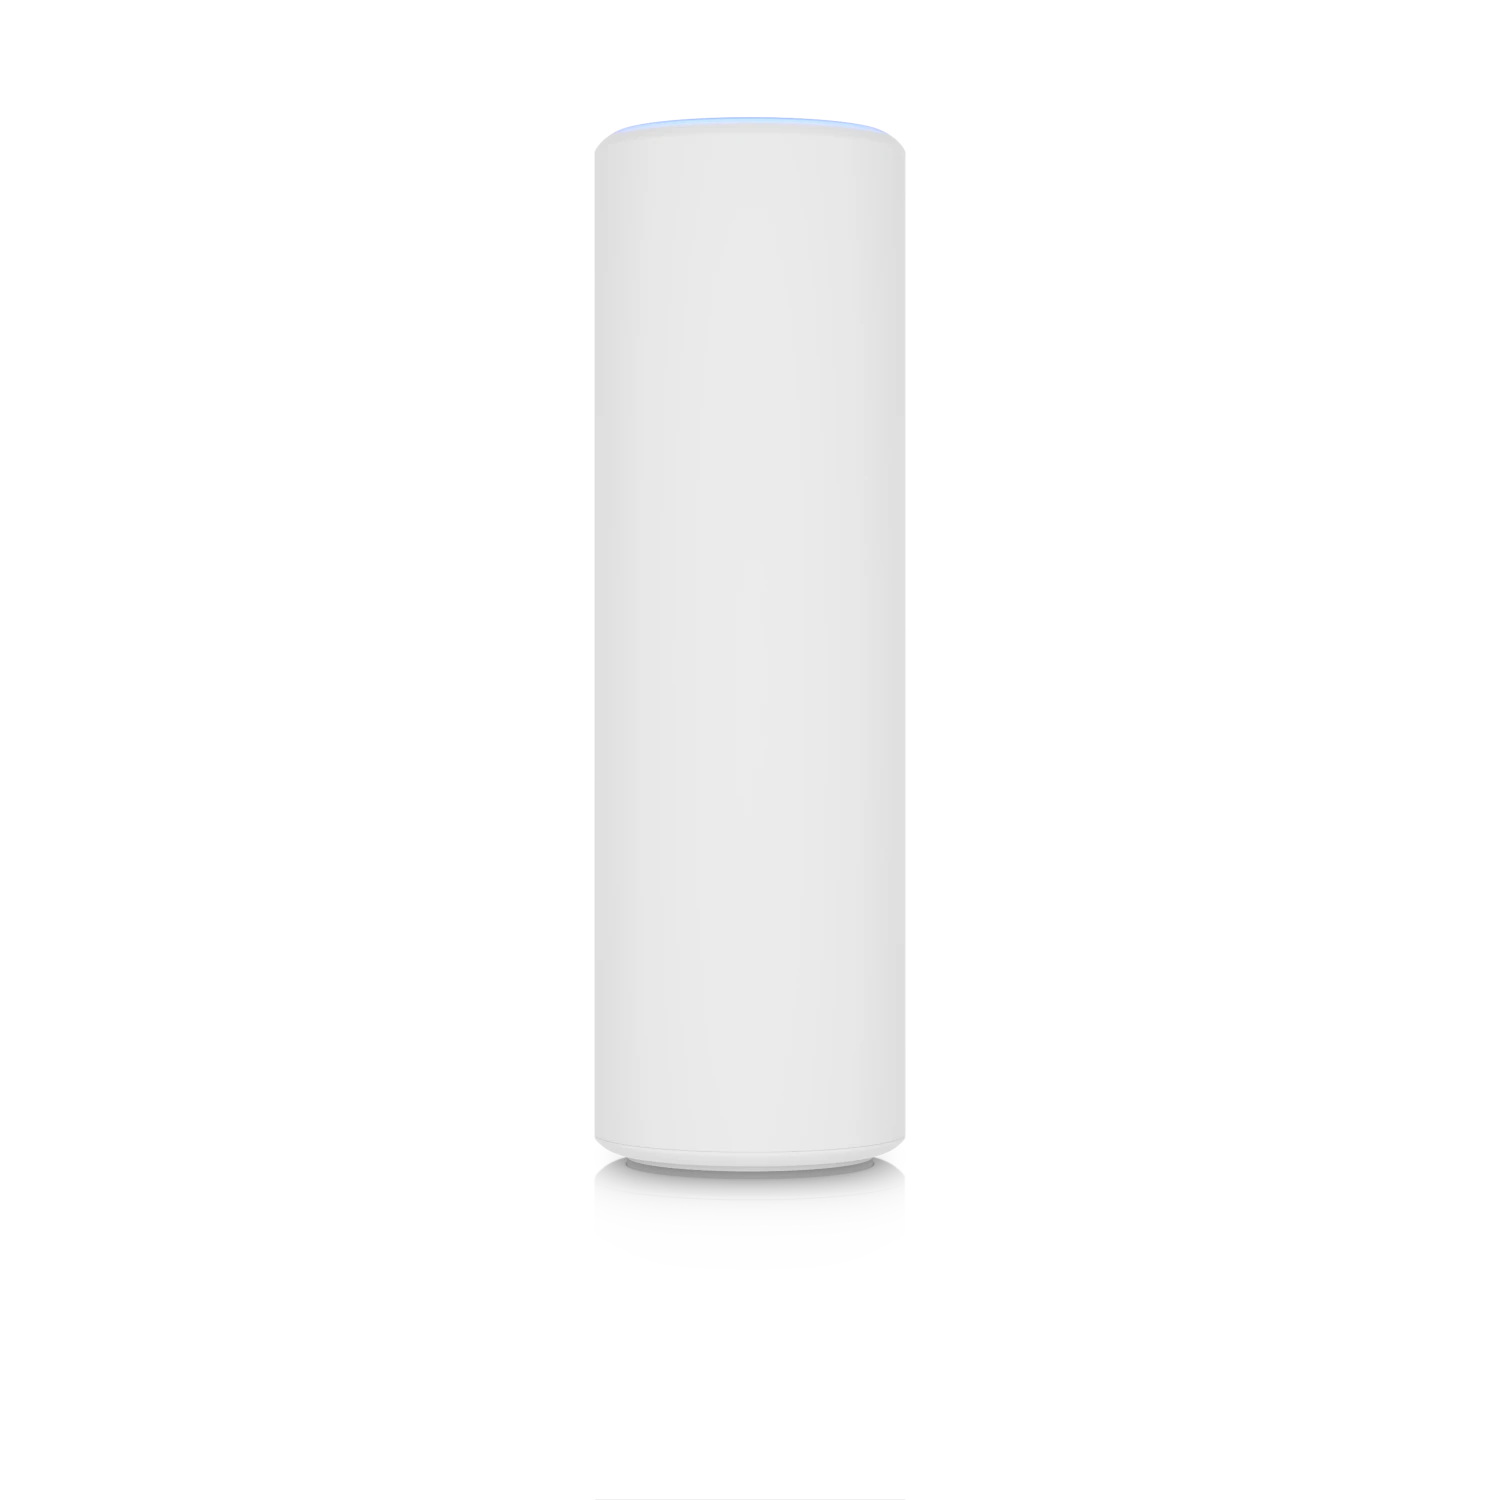 cylindrical wifi access point